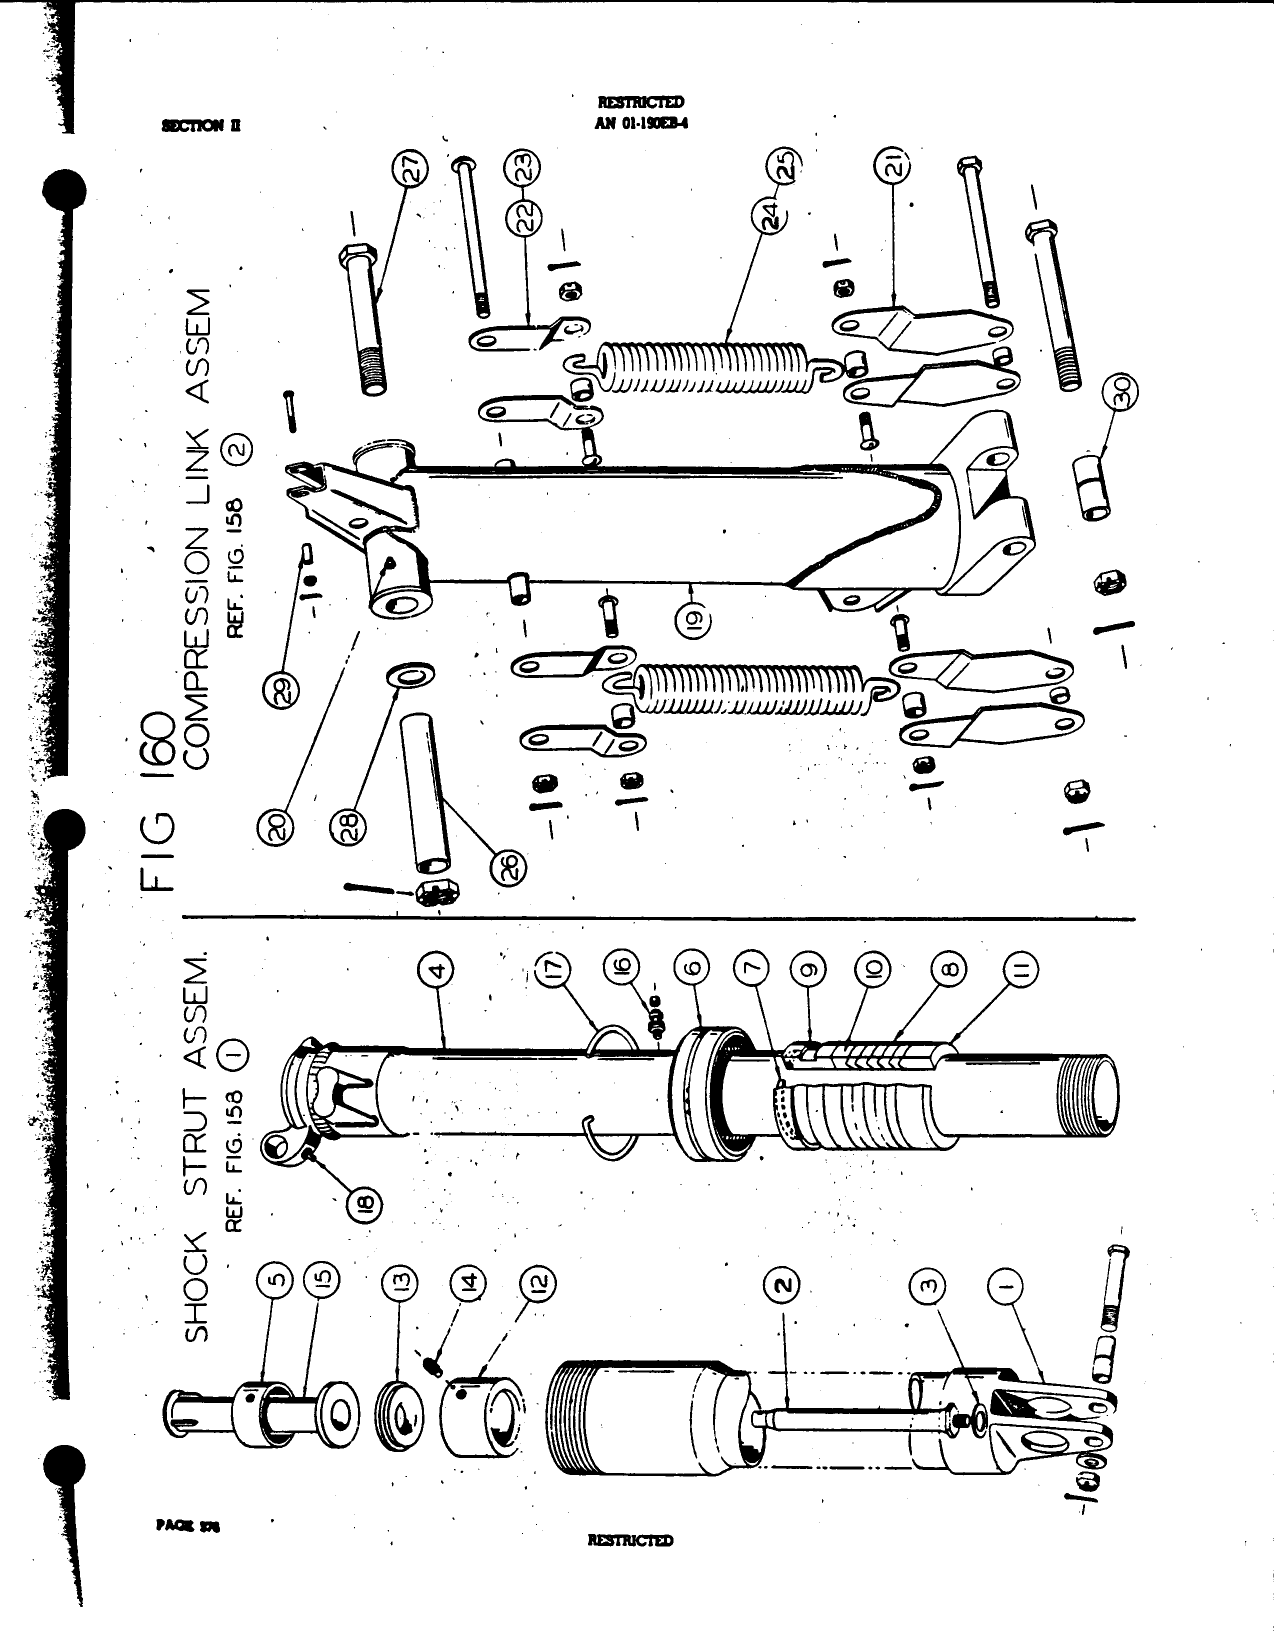 Sample page 9 from AirCorps Library document: Aircraft Parts Catalog TBM-3 (3 of 3)